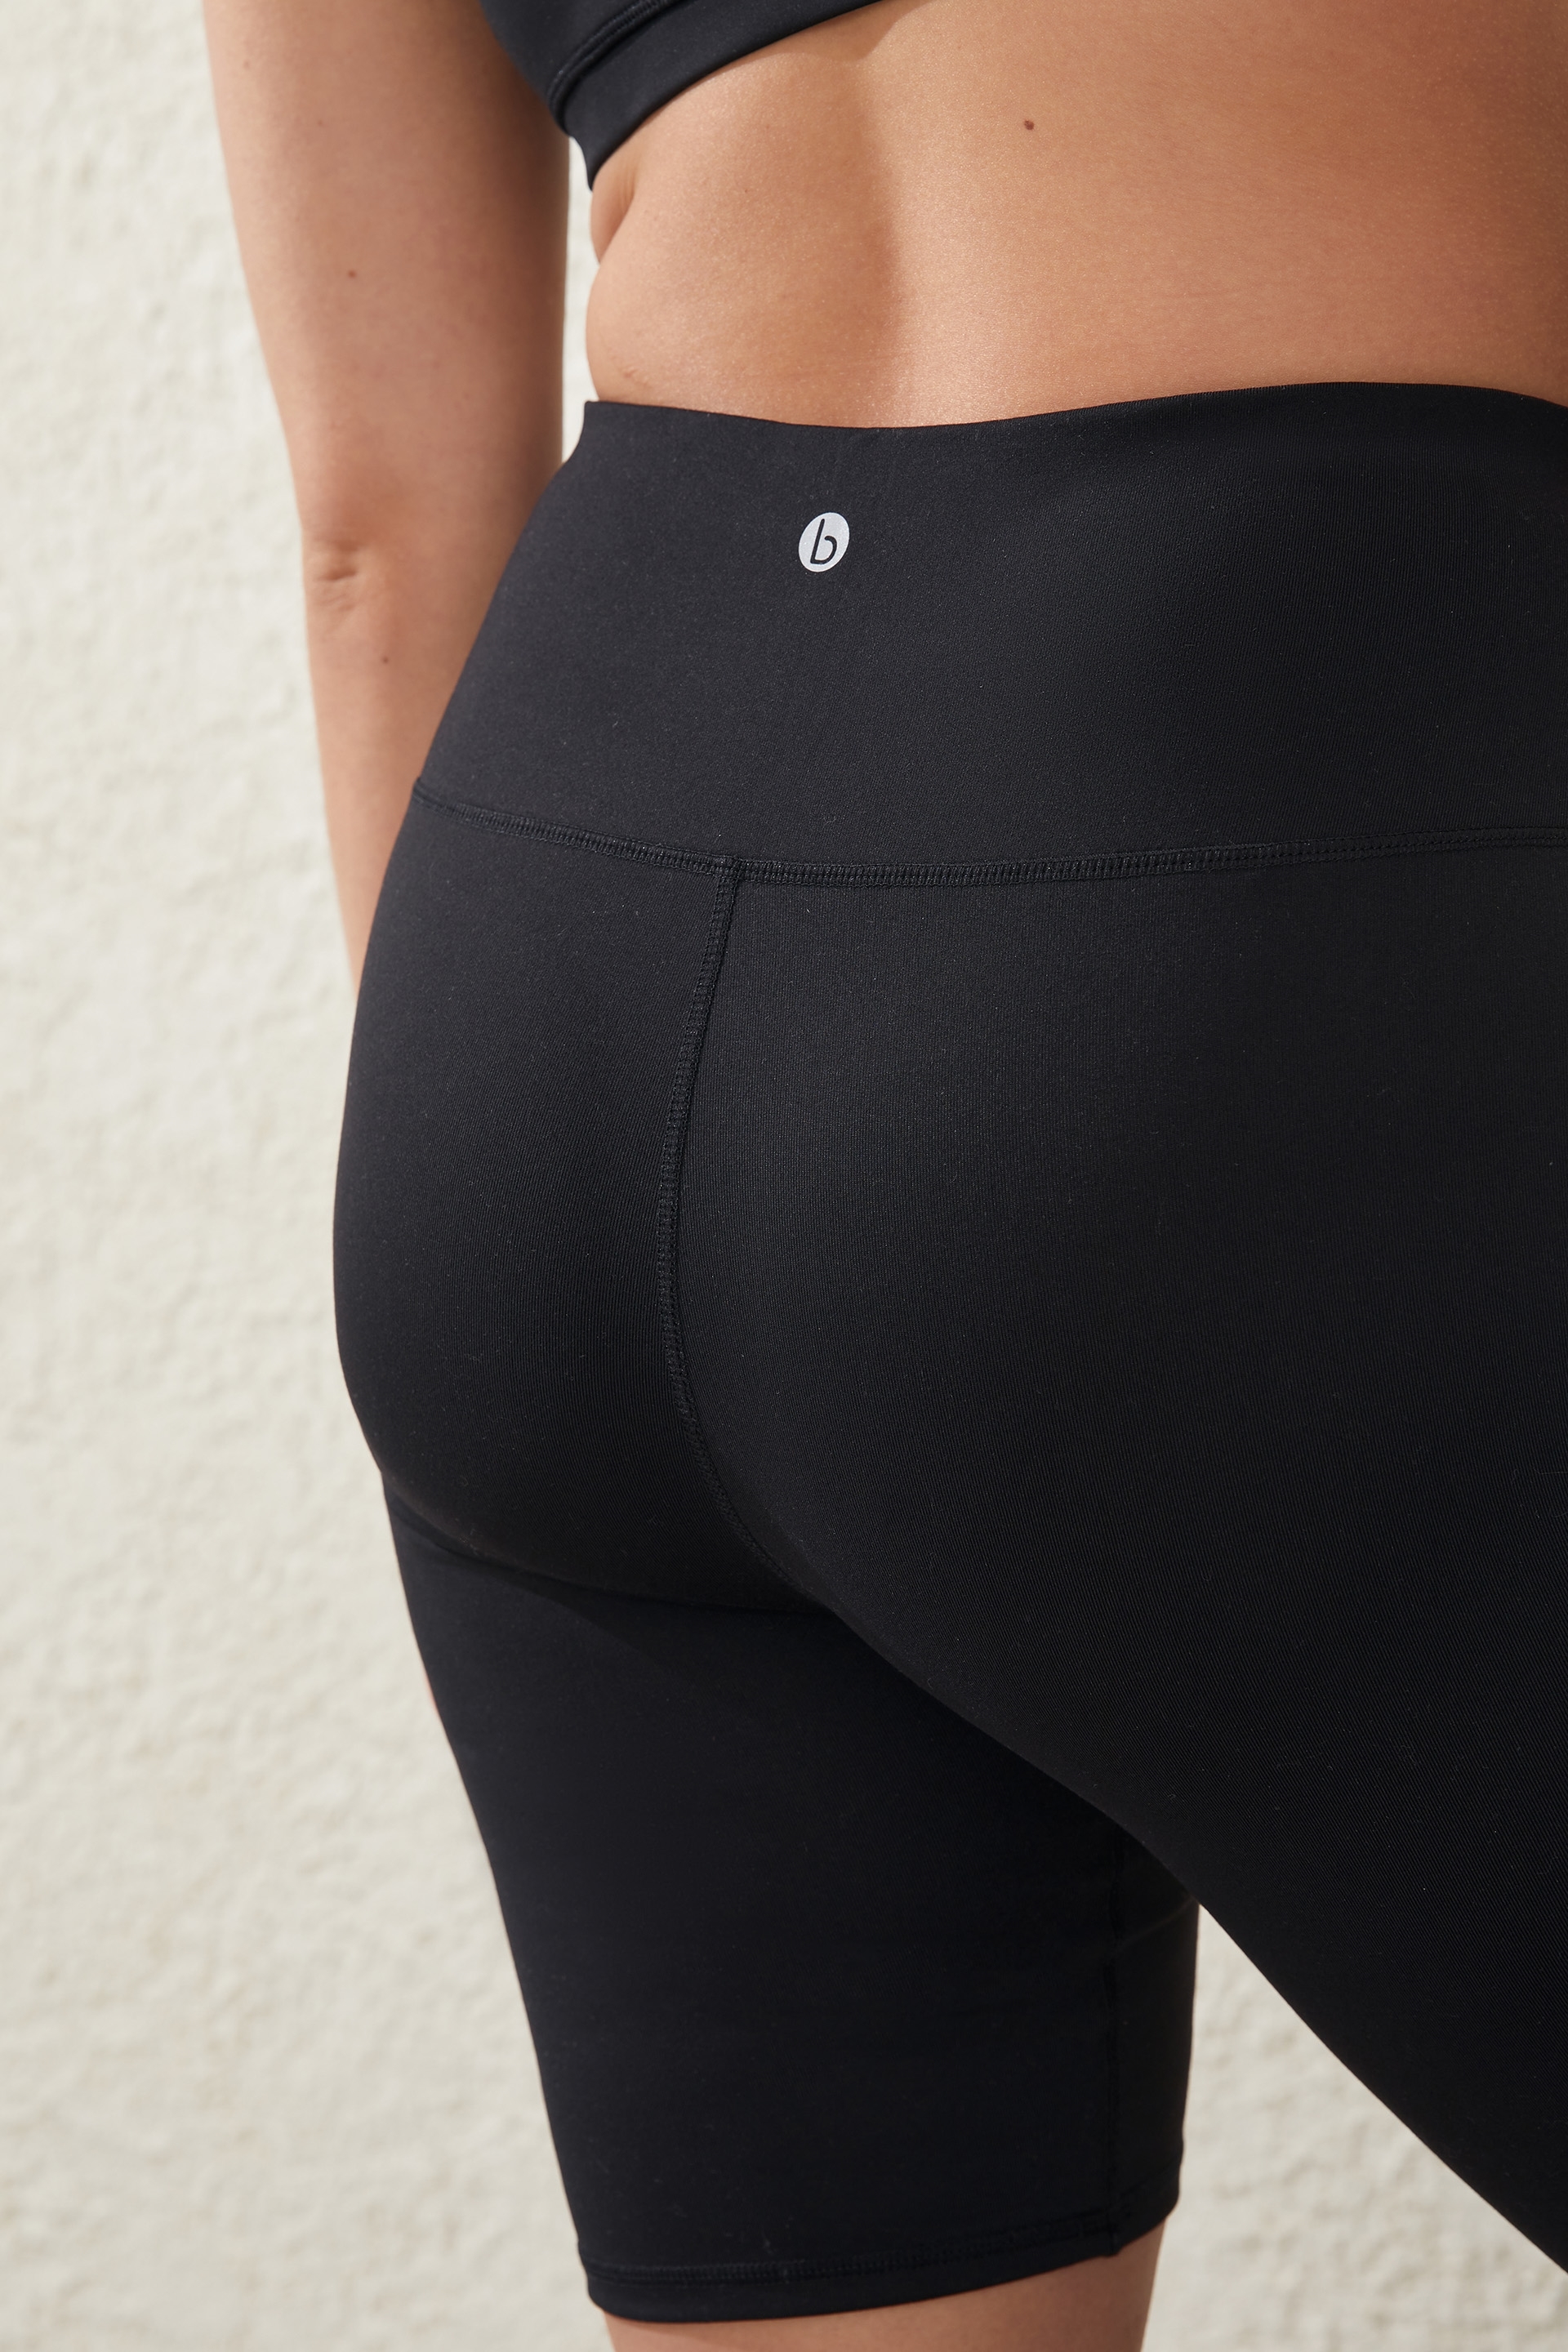 Cotton:On active legging shorts in black